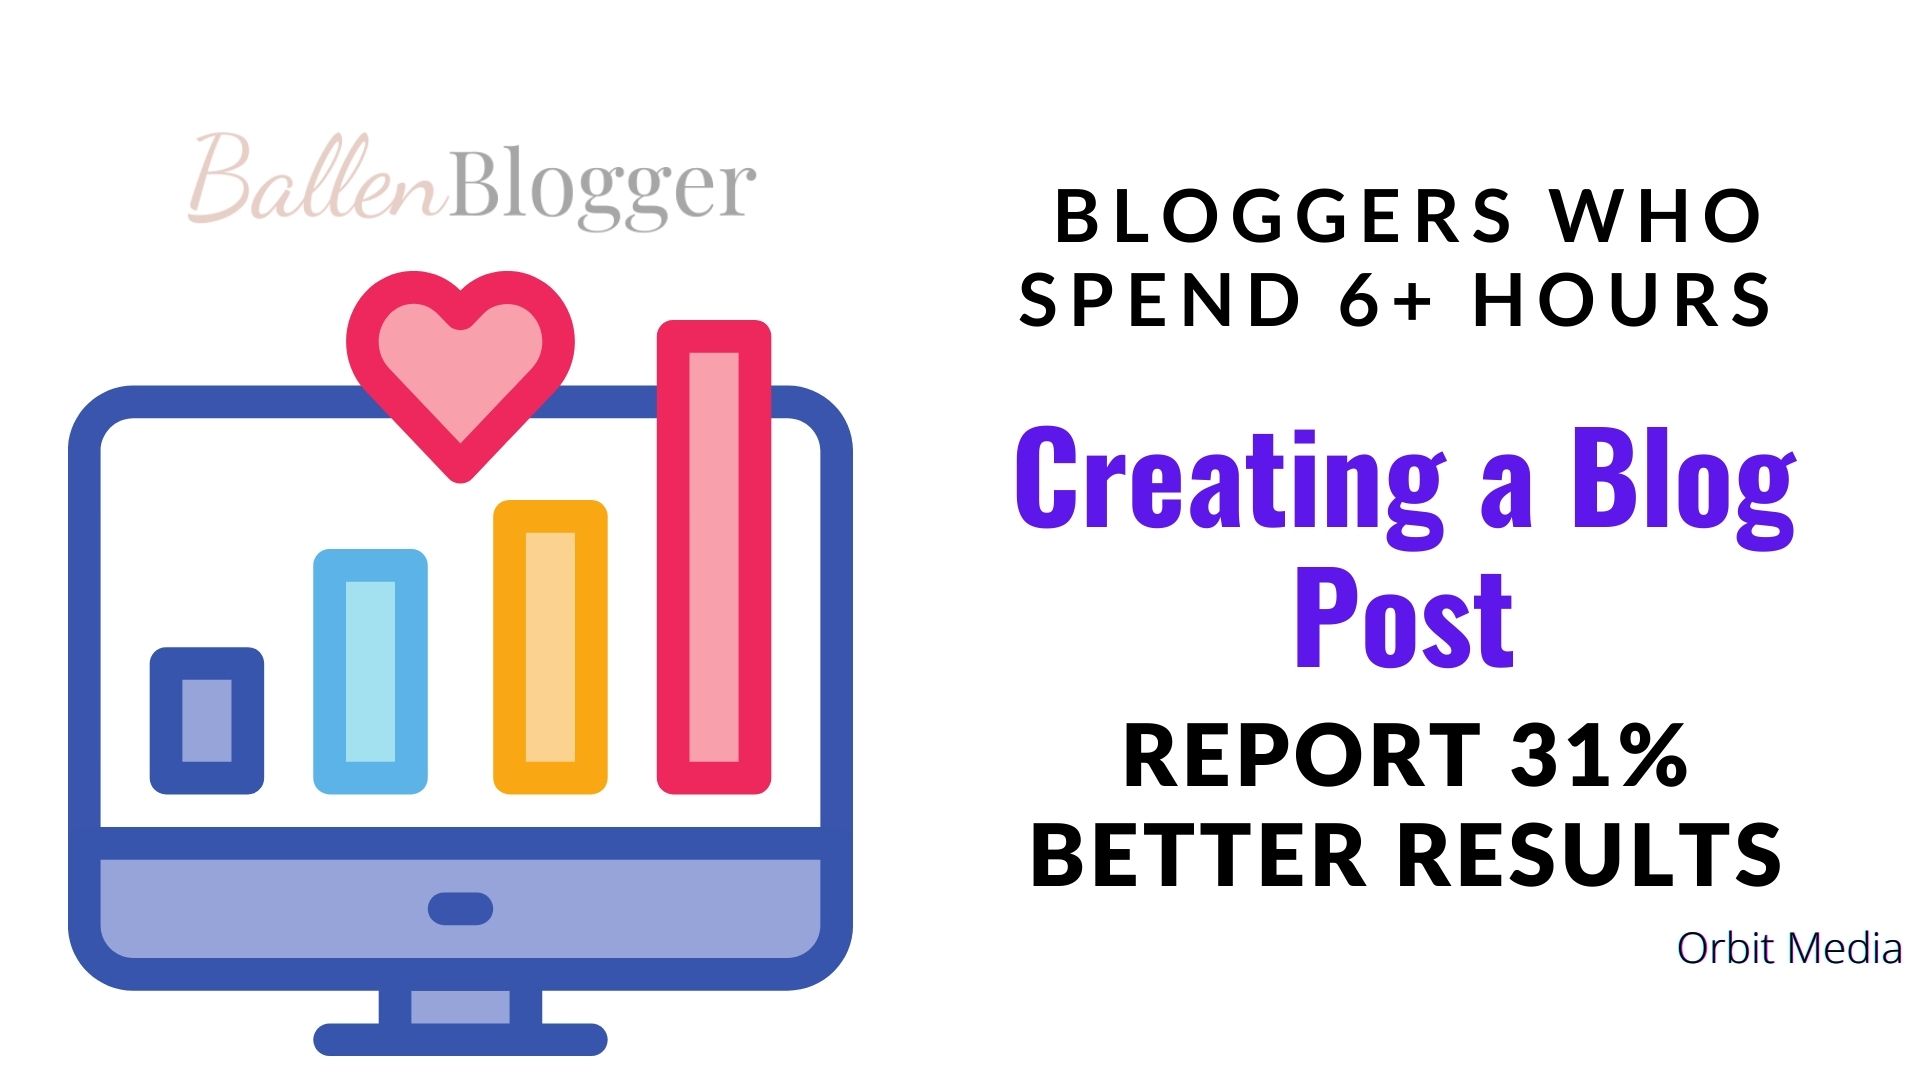 Bloggers who spend 6+ Hours Creating a Post report 31% Better Results according to Orbit Media